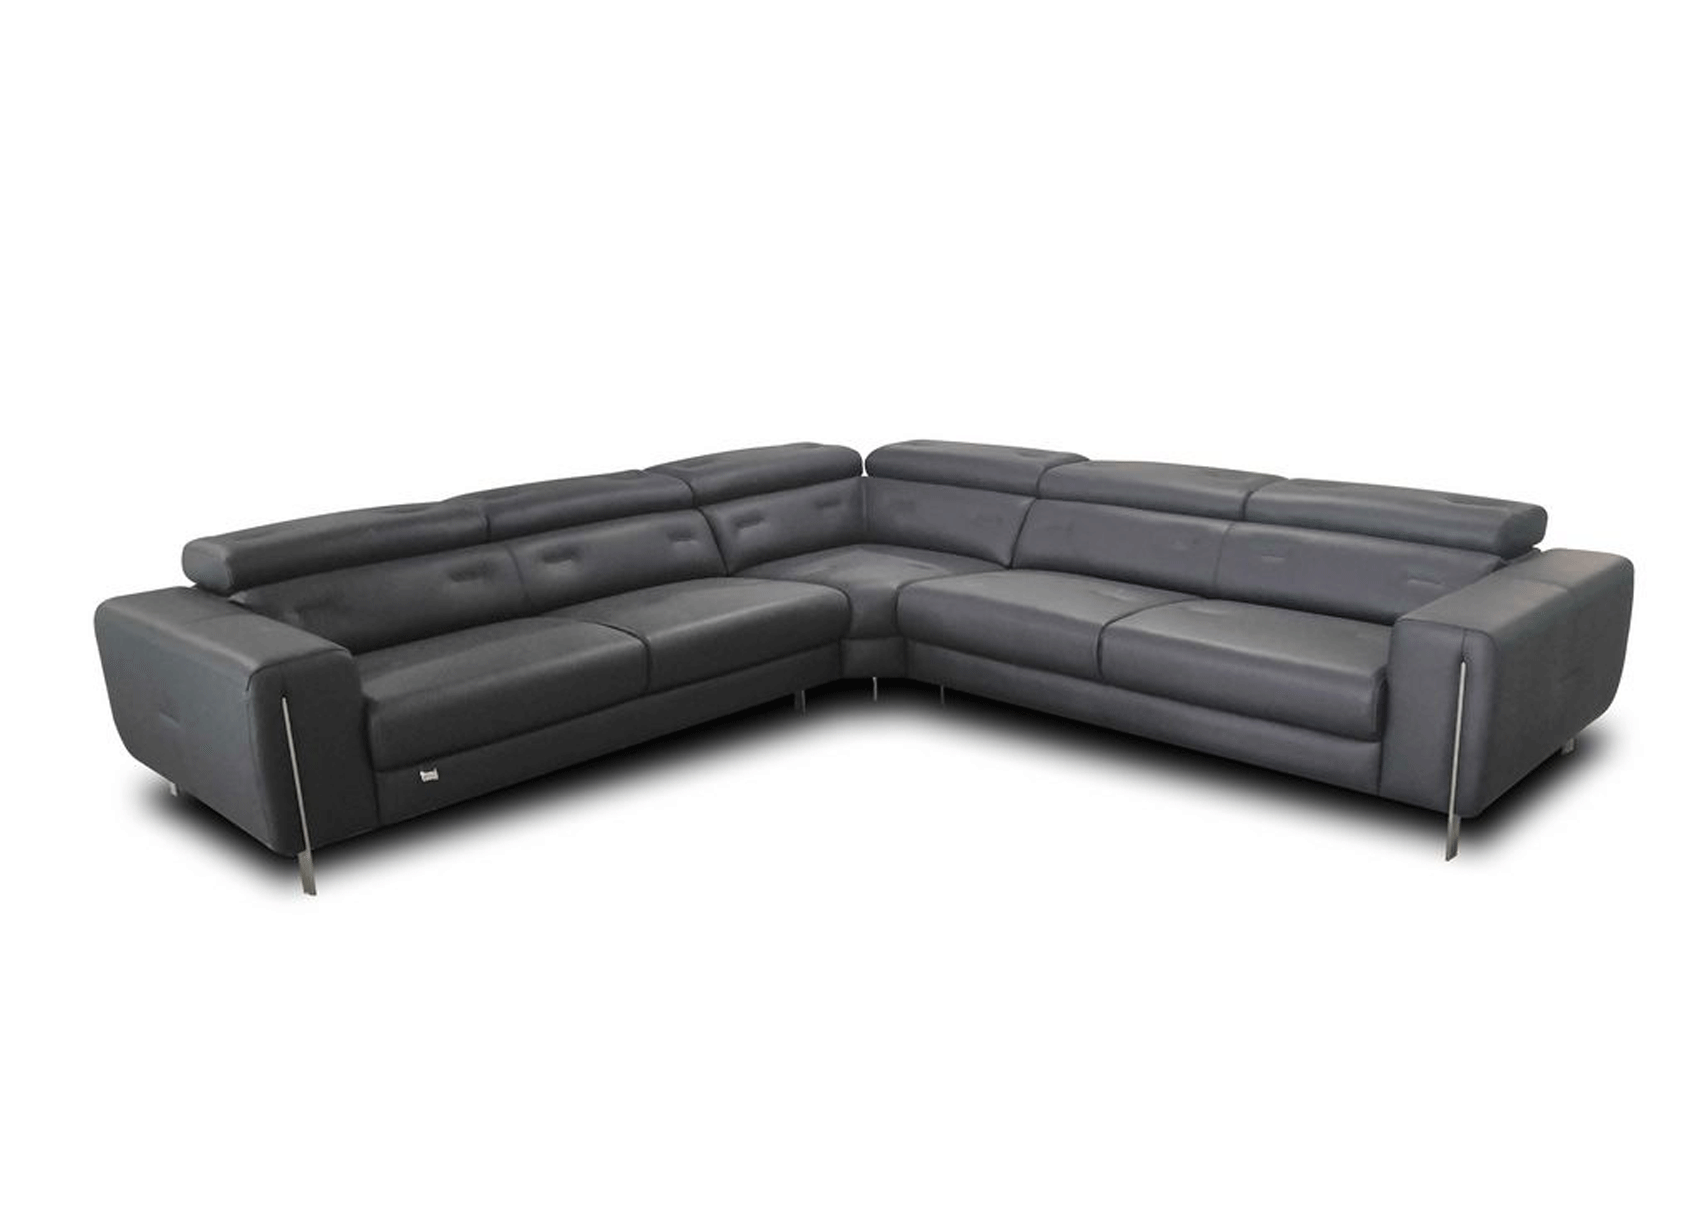 Living Room Furniture Sofas Loveseats and Chairs 795 Sectional